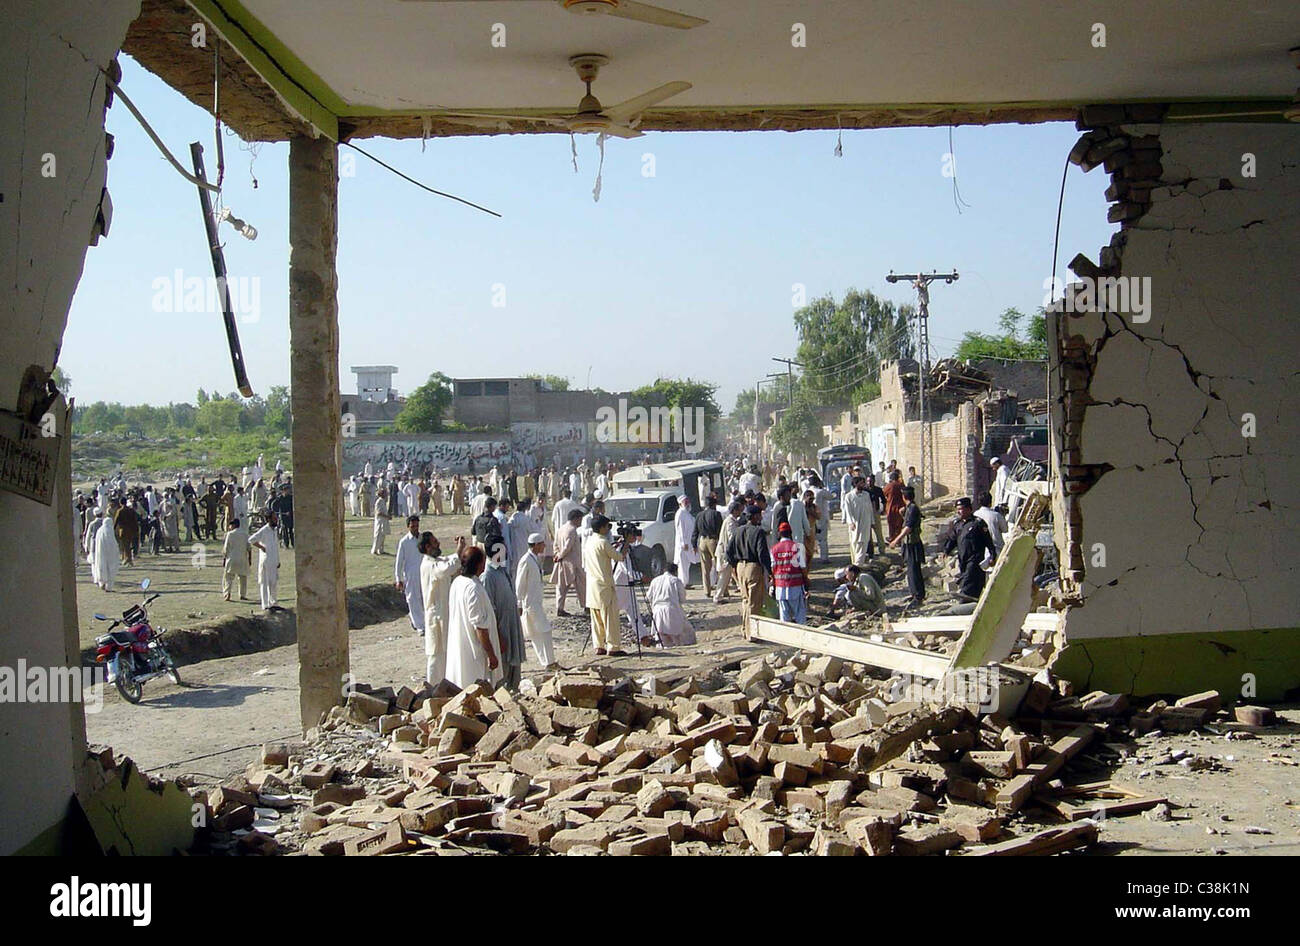 People gather at the site of explosion after bomb explosion in Charsadda District on Monday, May 02, 2011 Stock Photo